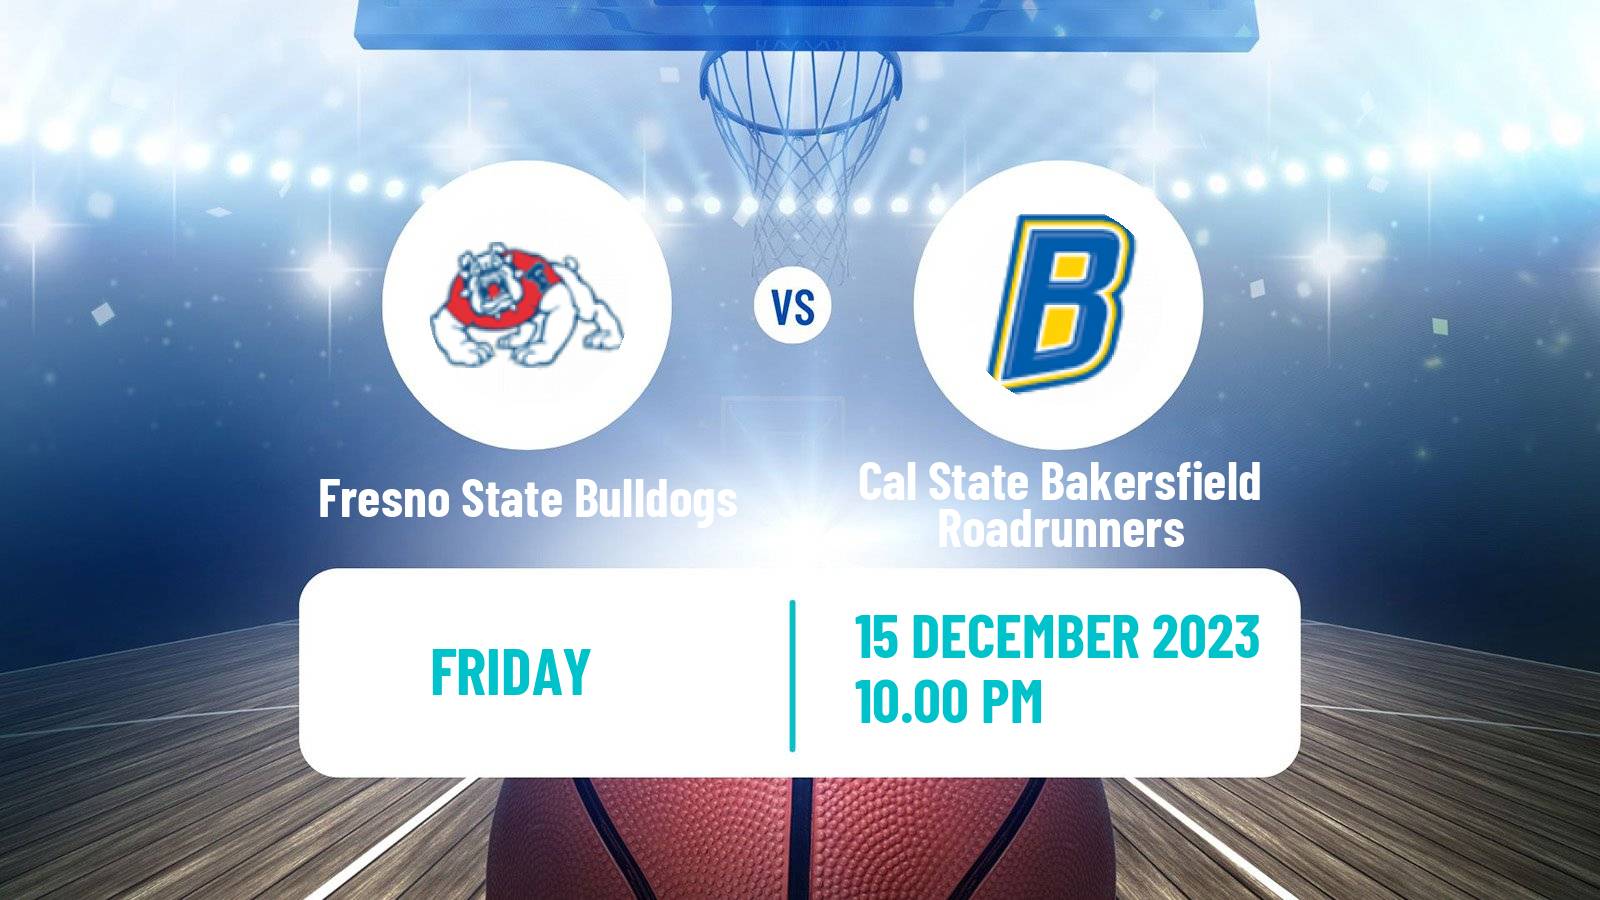 Basketball NCAA College Basketball Fresno State Bulldogs - Cal State Bakersfield Roadrunners